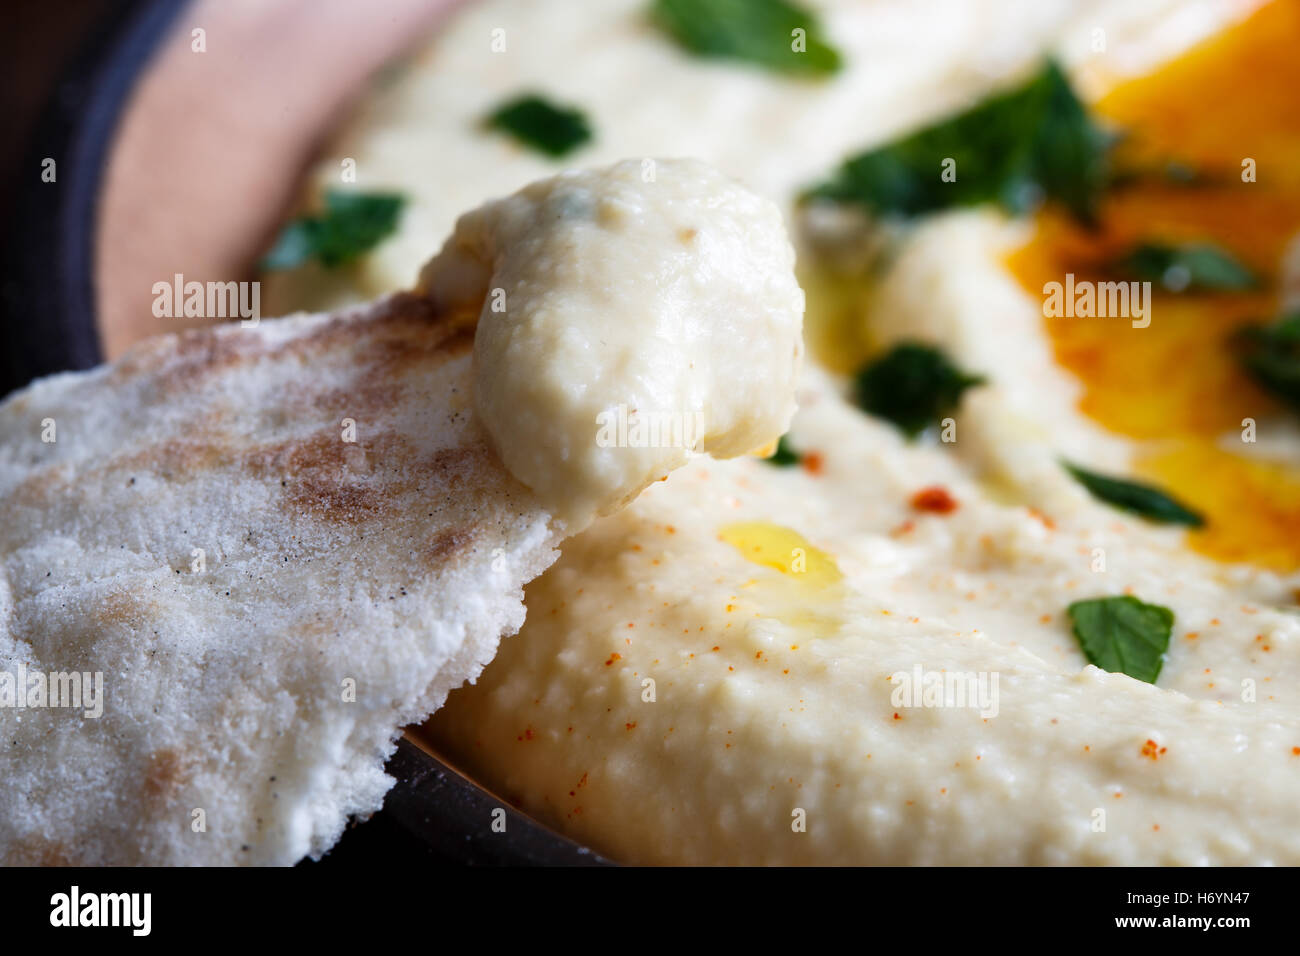 Detail of hummus on pita bread. Plate of hummus in background. Stock Photo